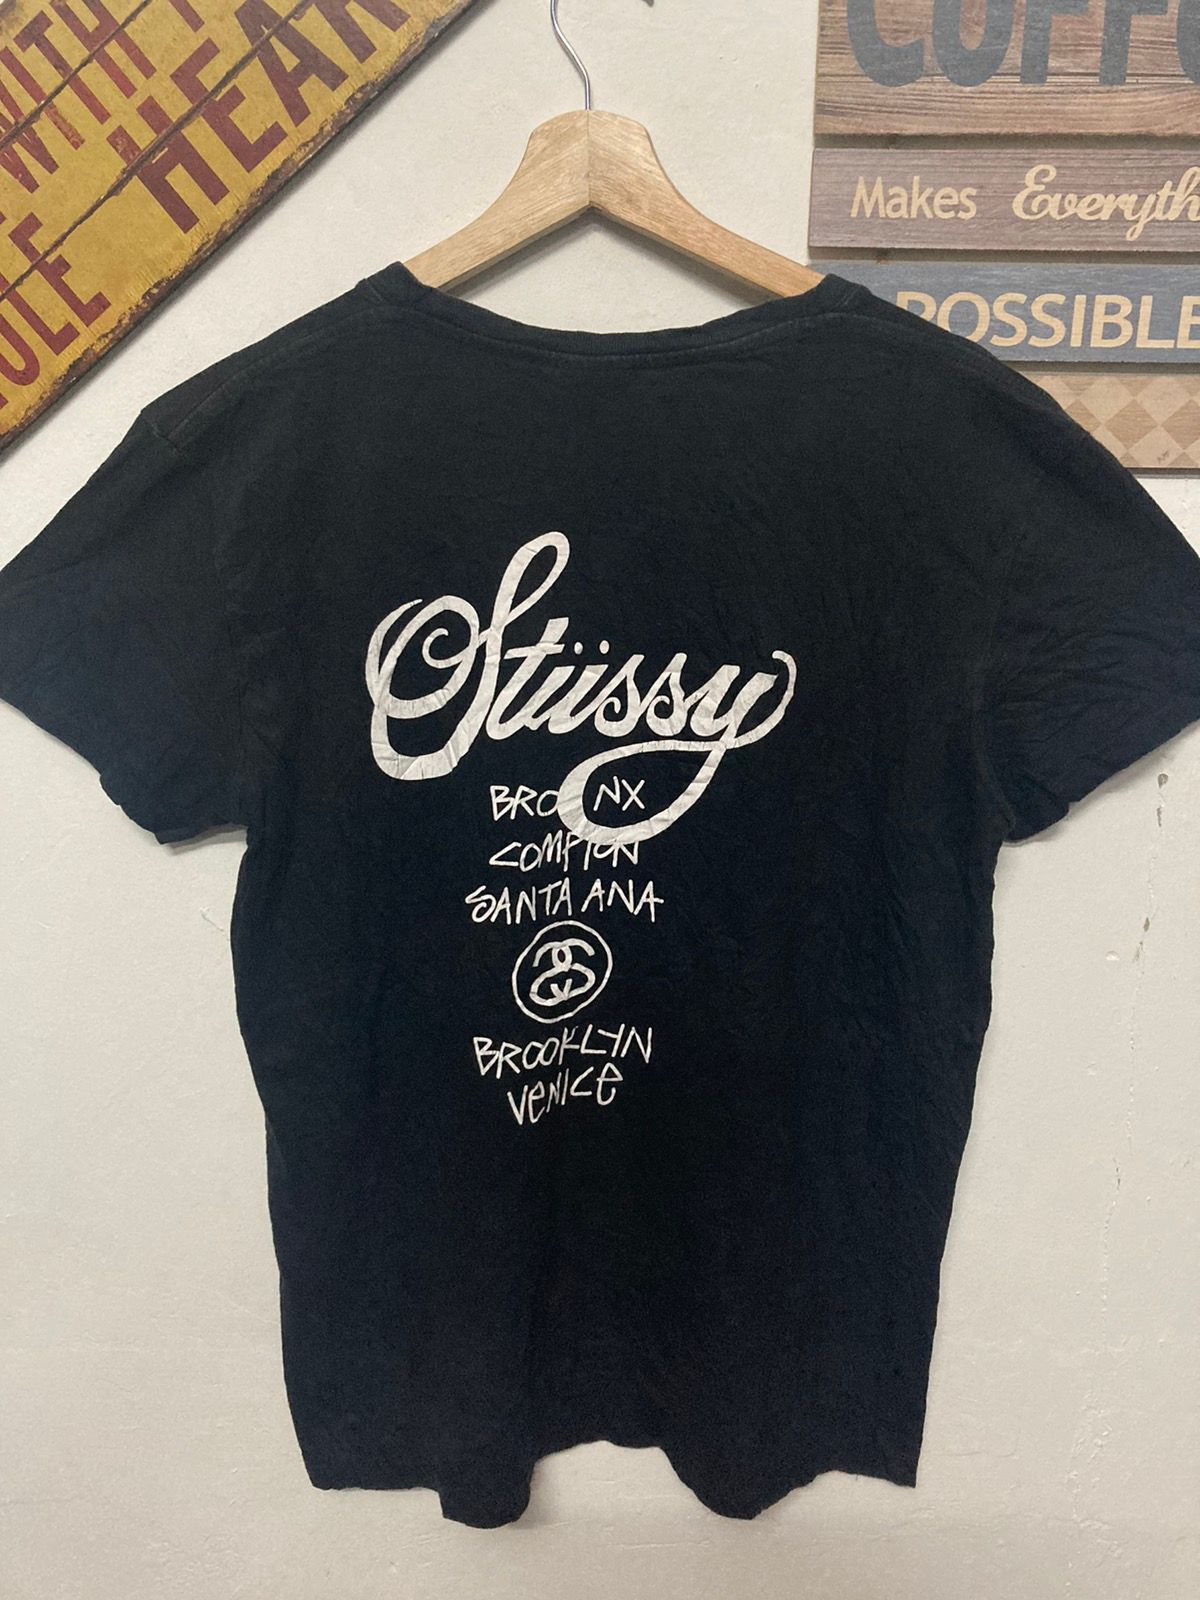 Stussy Tour Shirt For Women in XL size - 2